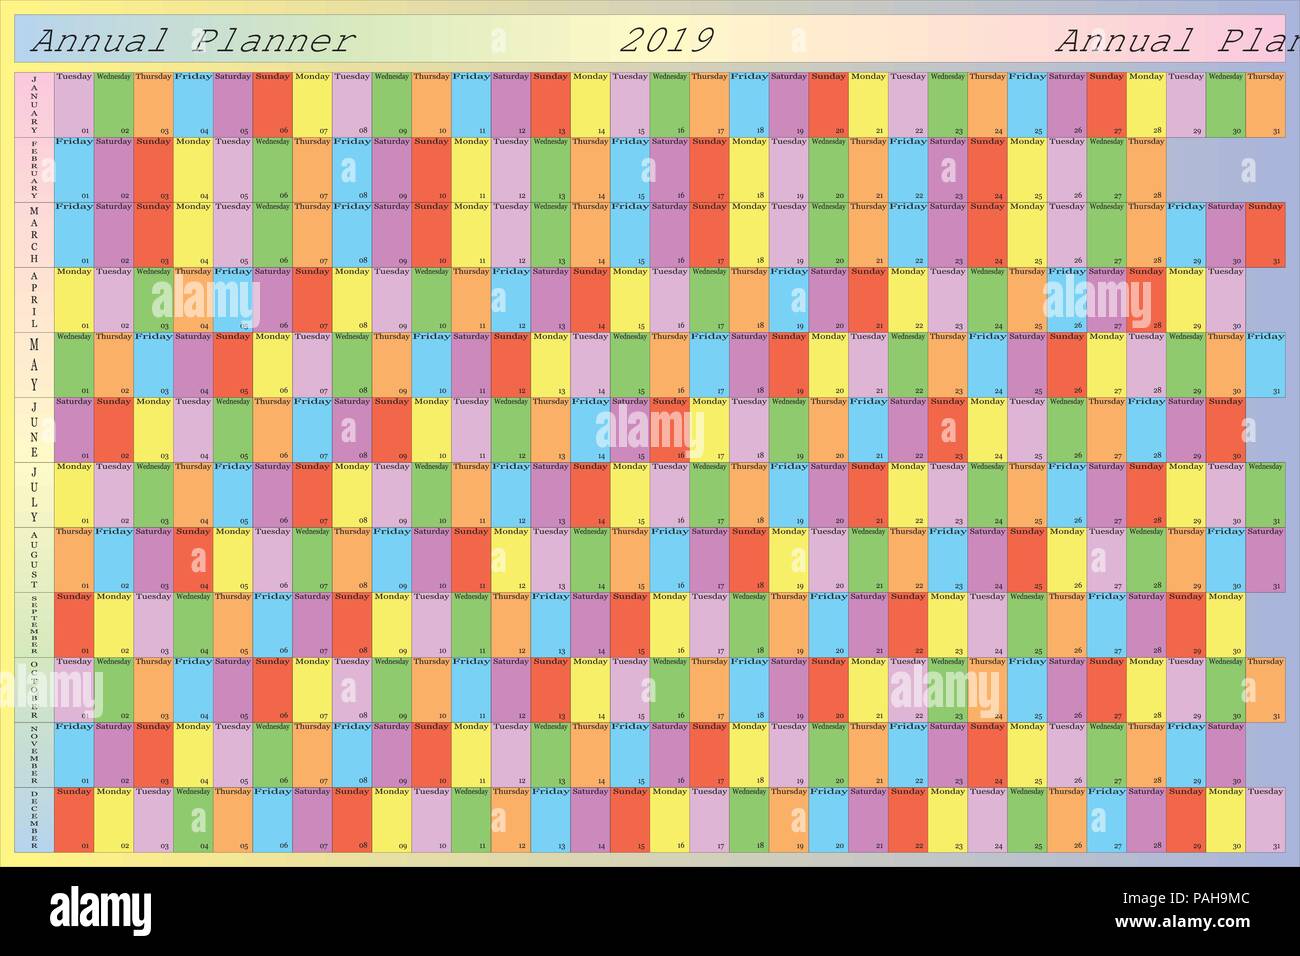 Annual planner 2019 with specific color for each weekday - TO BE personalized with your LOGO Stock Vector